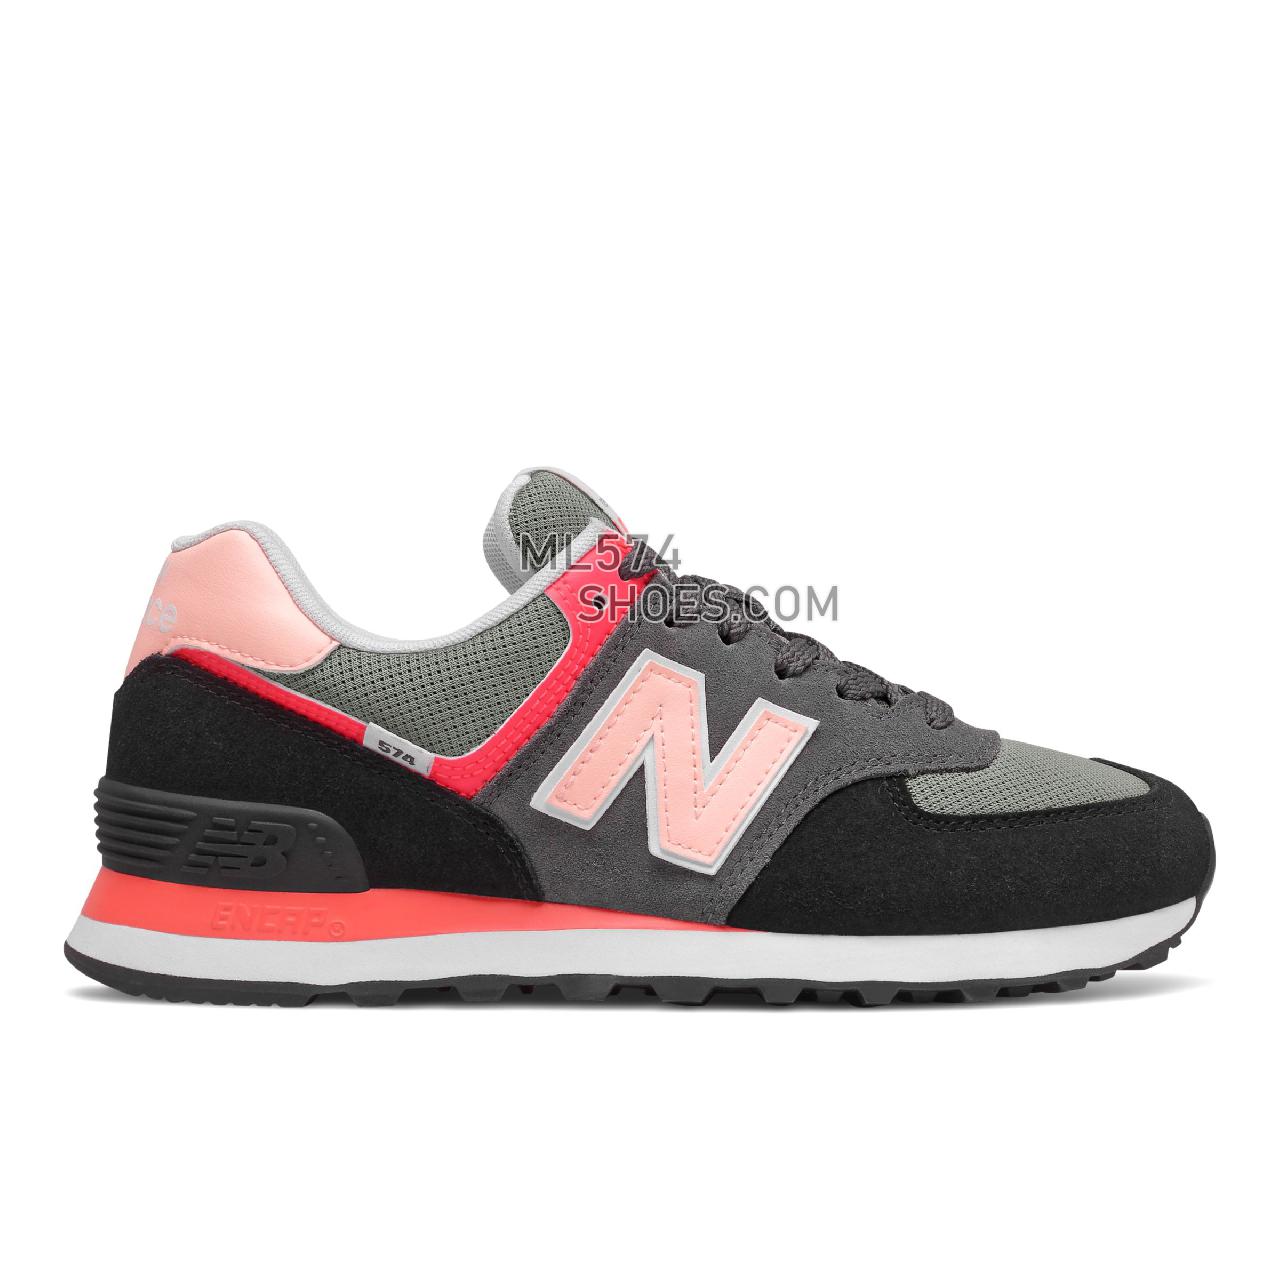 New Balance 574 - Women's Classic Sneakers - Black with Cloud Pink - WL574ST2